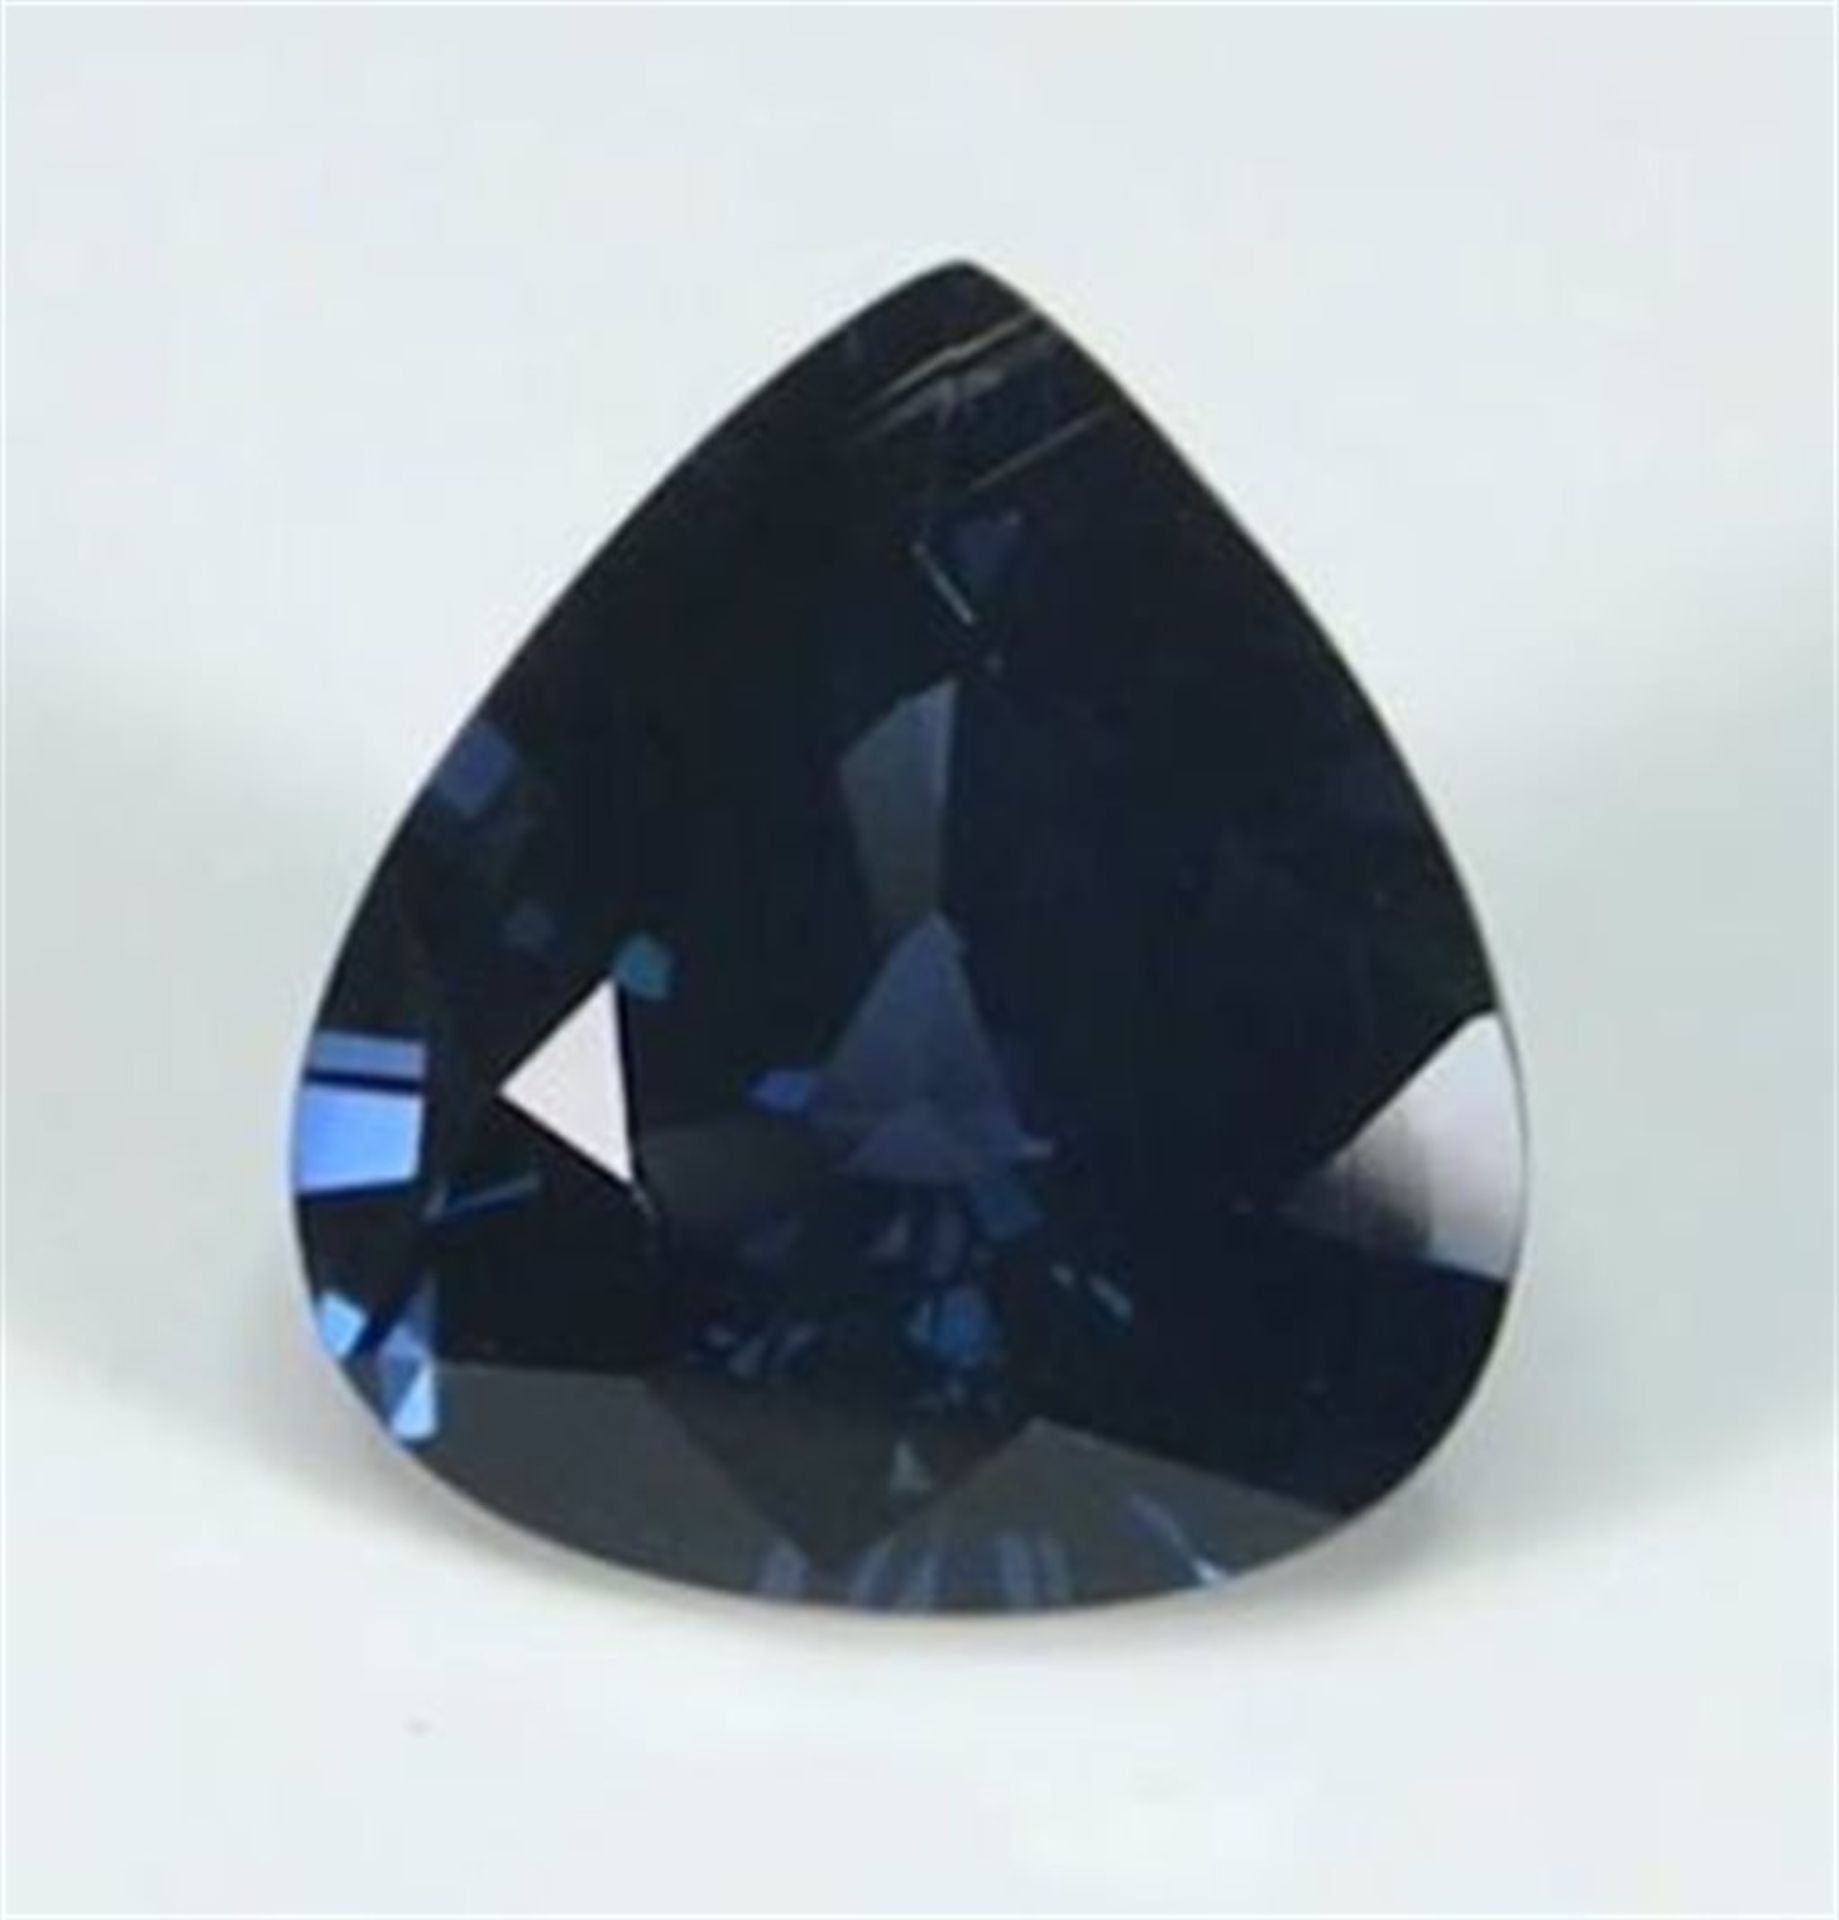 GIA Certified 3.35 ct. Dark Blue Spinel - Image 3 of 10